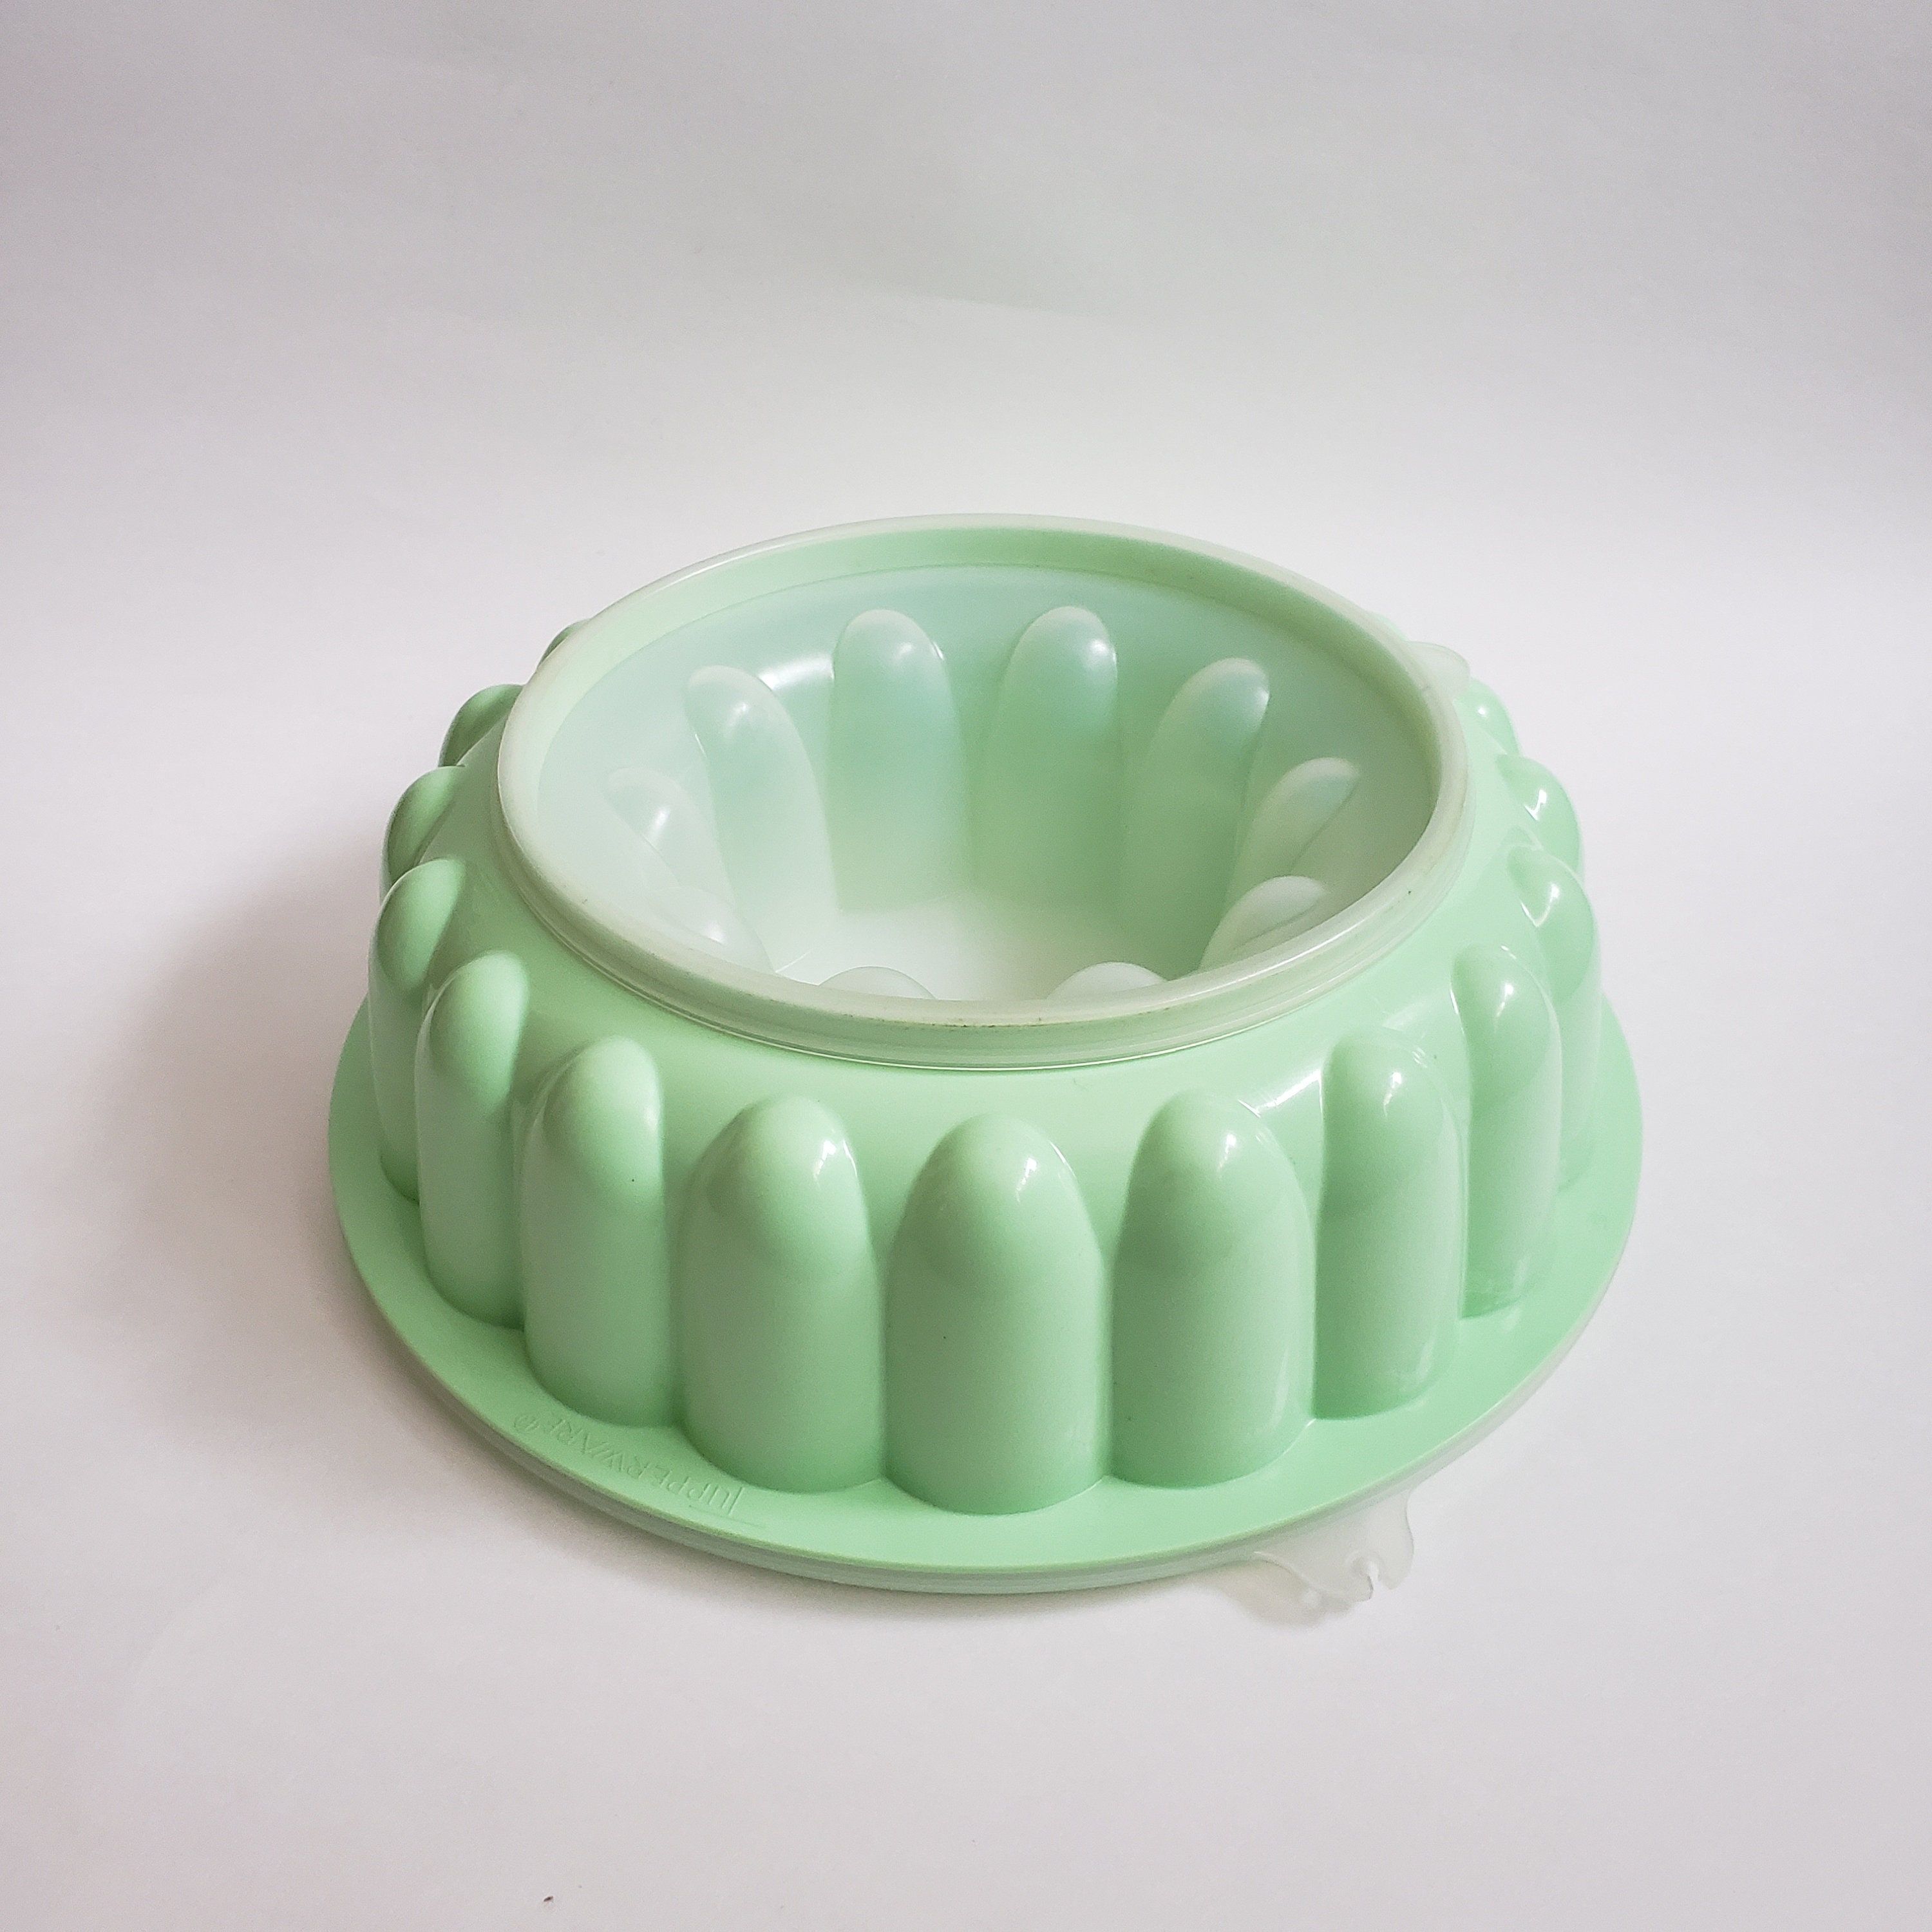 Tupperware 3 Piece Jello Mold with Lid Vintage Light Green